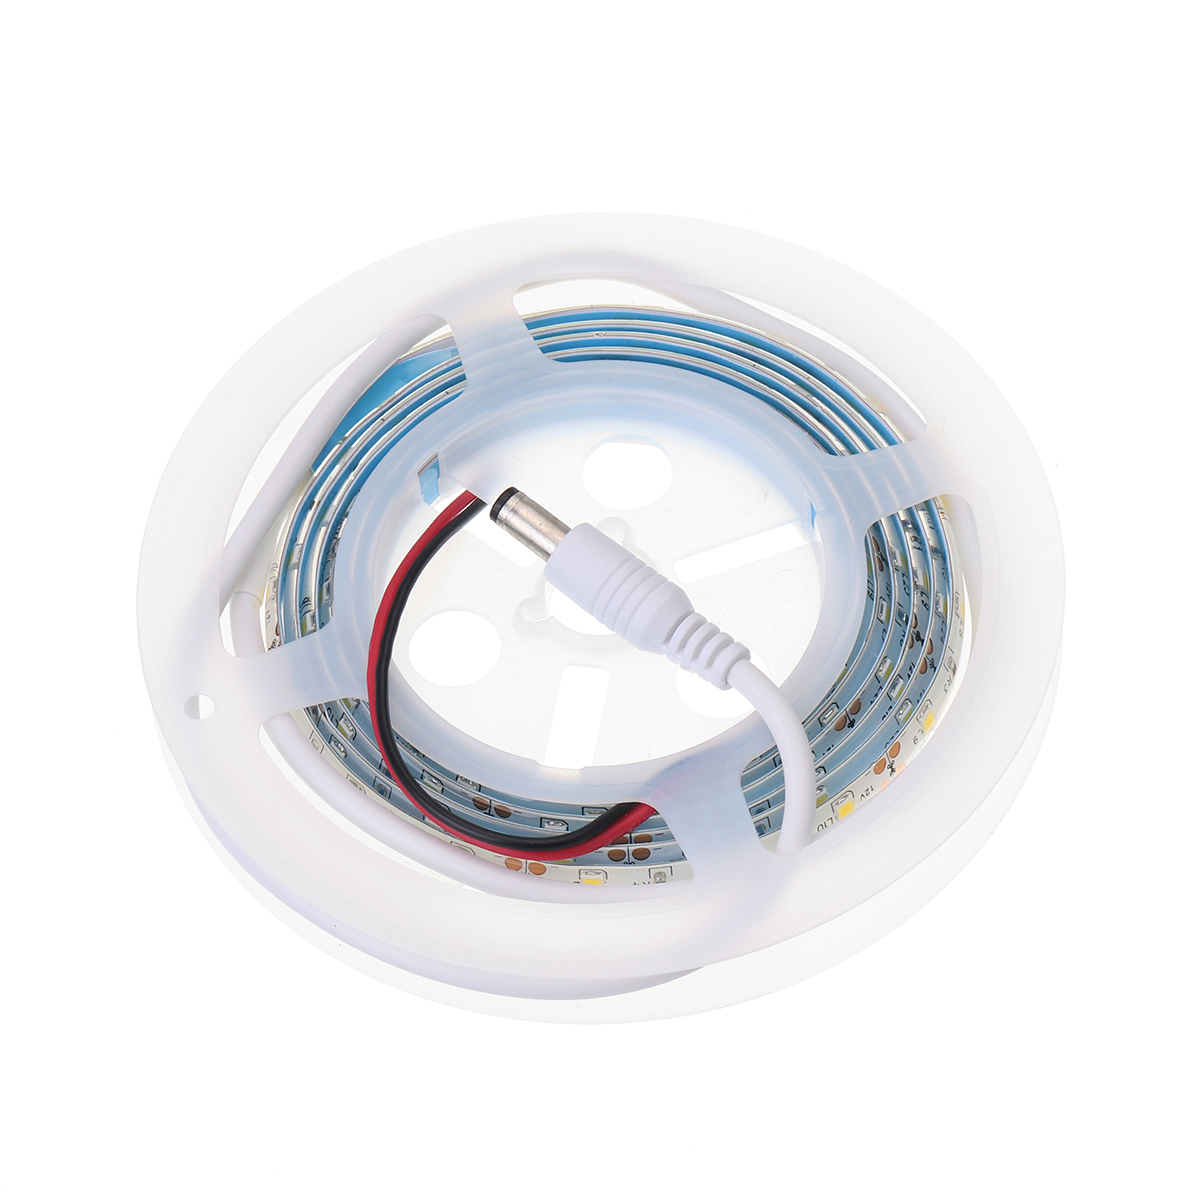 15M-3M-Motion-Activated-Sensor-Flexible-LED-Strip-Light-Bed-Night-Lamp-with-Switch-EU-Plug-DC12V-1298415-3